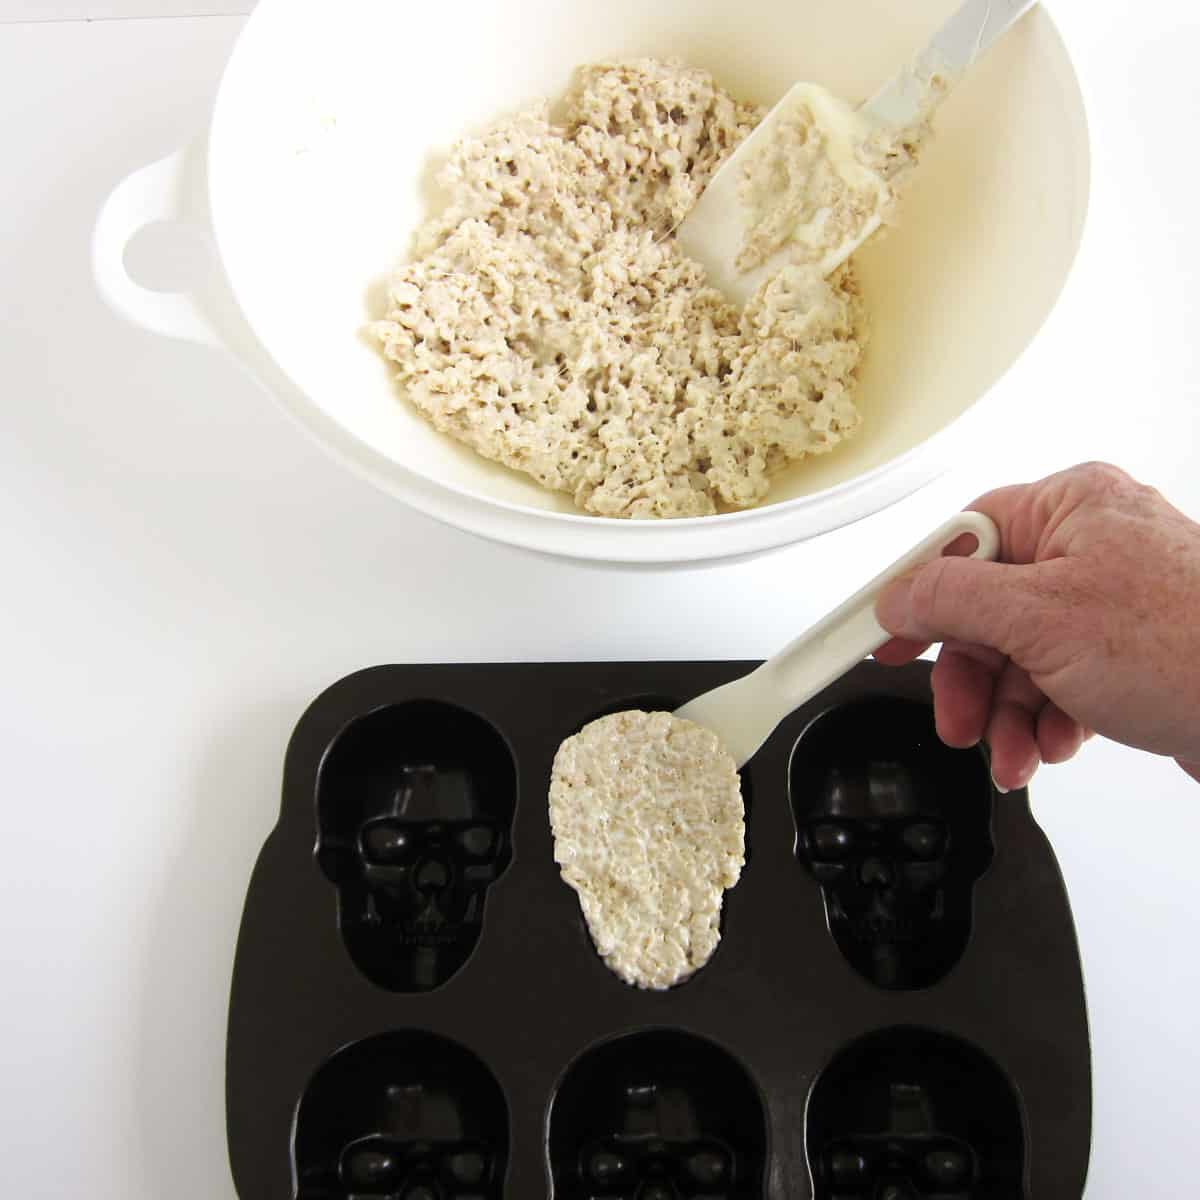 running a thin plastic blender spatula around the rice krispie treat skull to remove it from the skull pan.